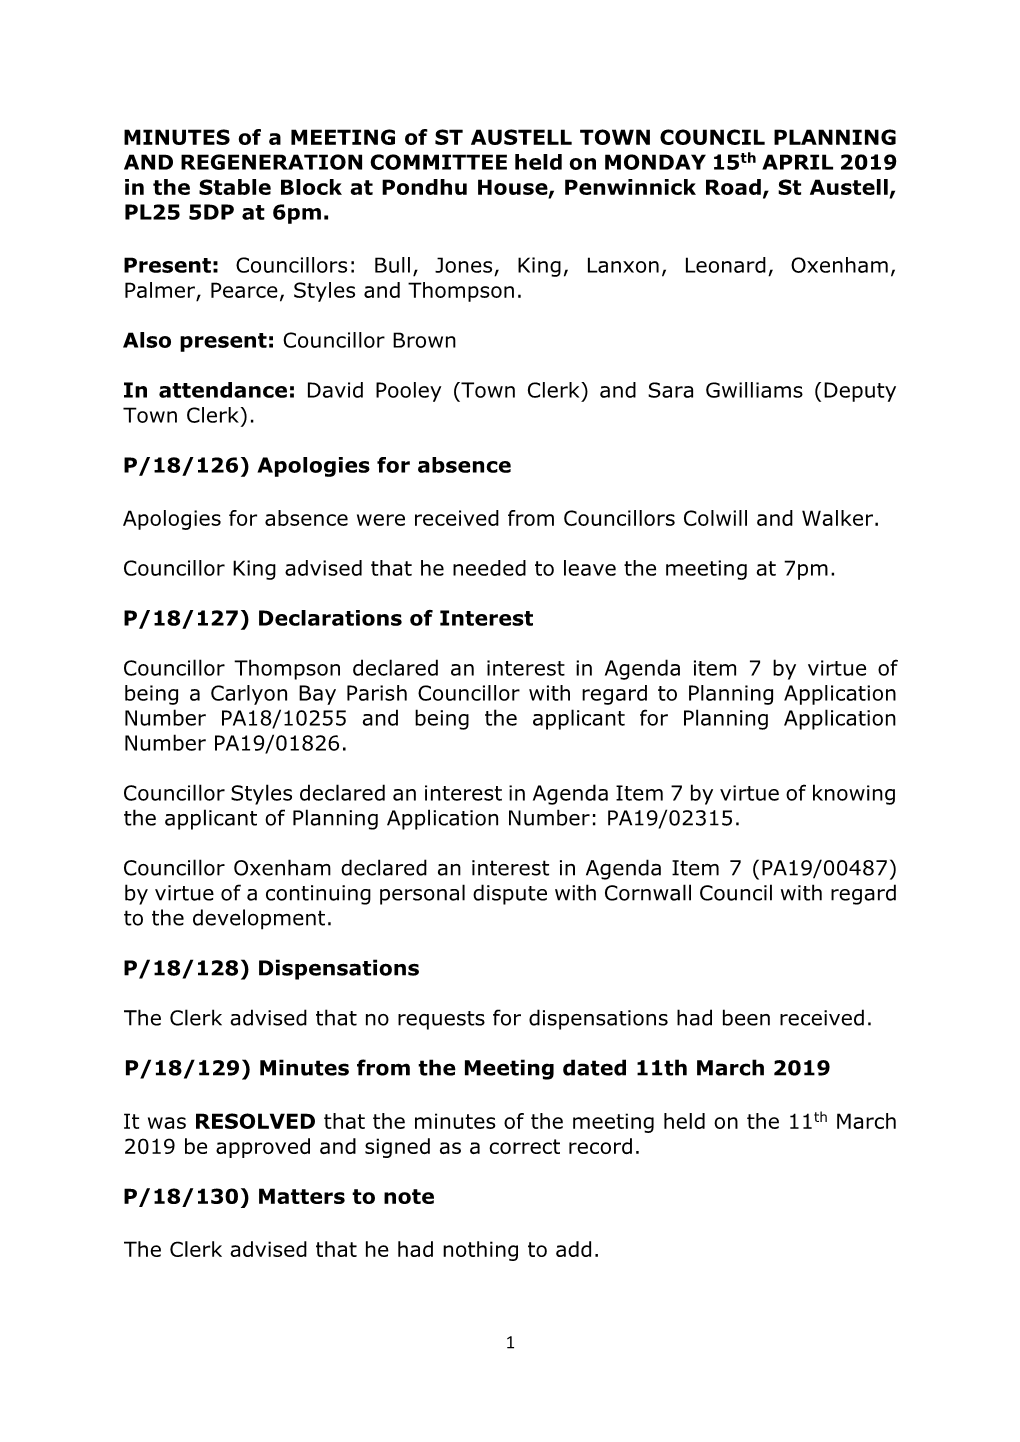 MINUTES of a MEETING of ST AUSTELL TOWN COUNCIL PLANNING and REGENERATION COMMITTEE Held on MONDAY 15Th APRIL 2019 in the Stable